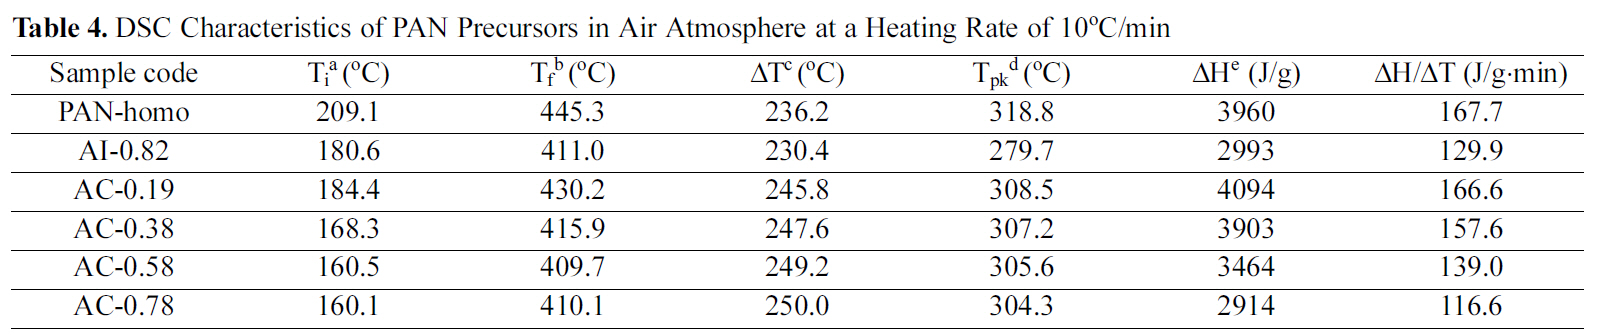 DSC Characteristics of PAN Precursors in Air Atmosphere at a Heating Rate of 10oC/min